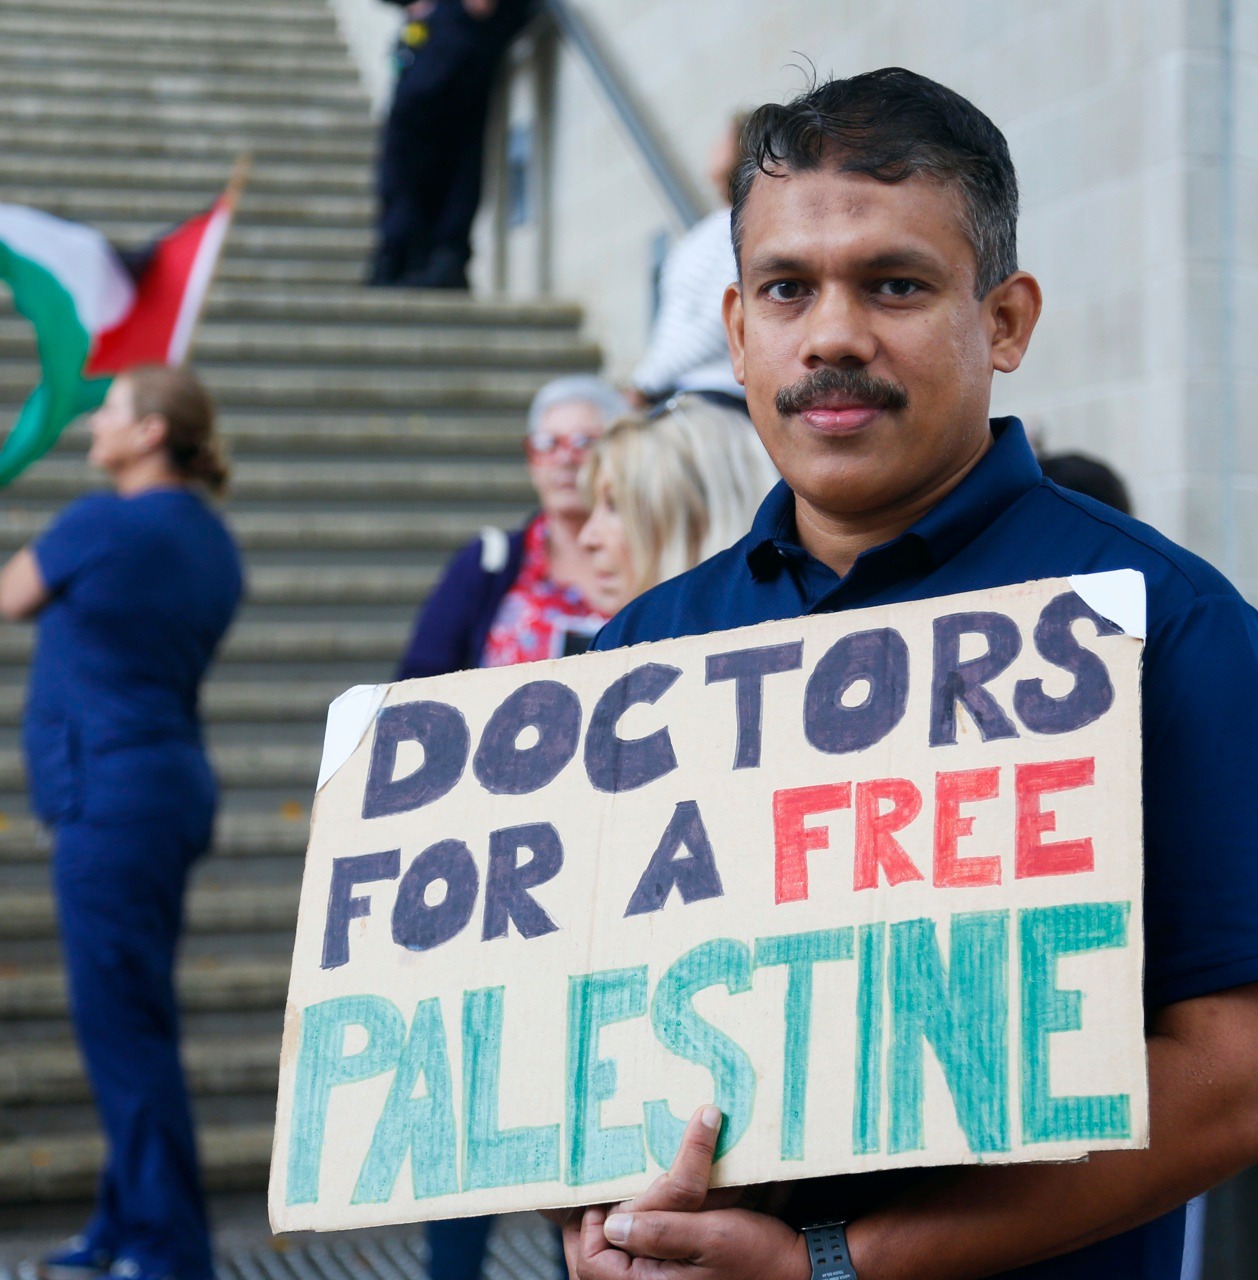 Doctors for a Free Palestine